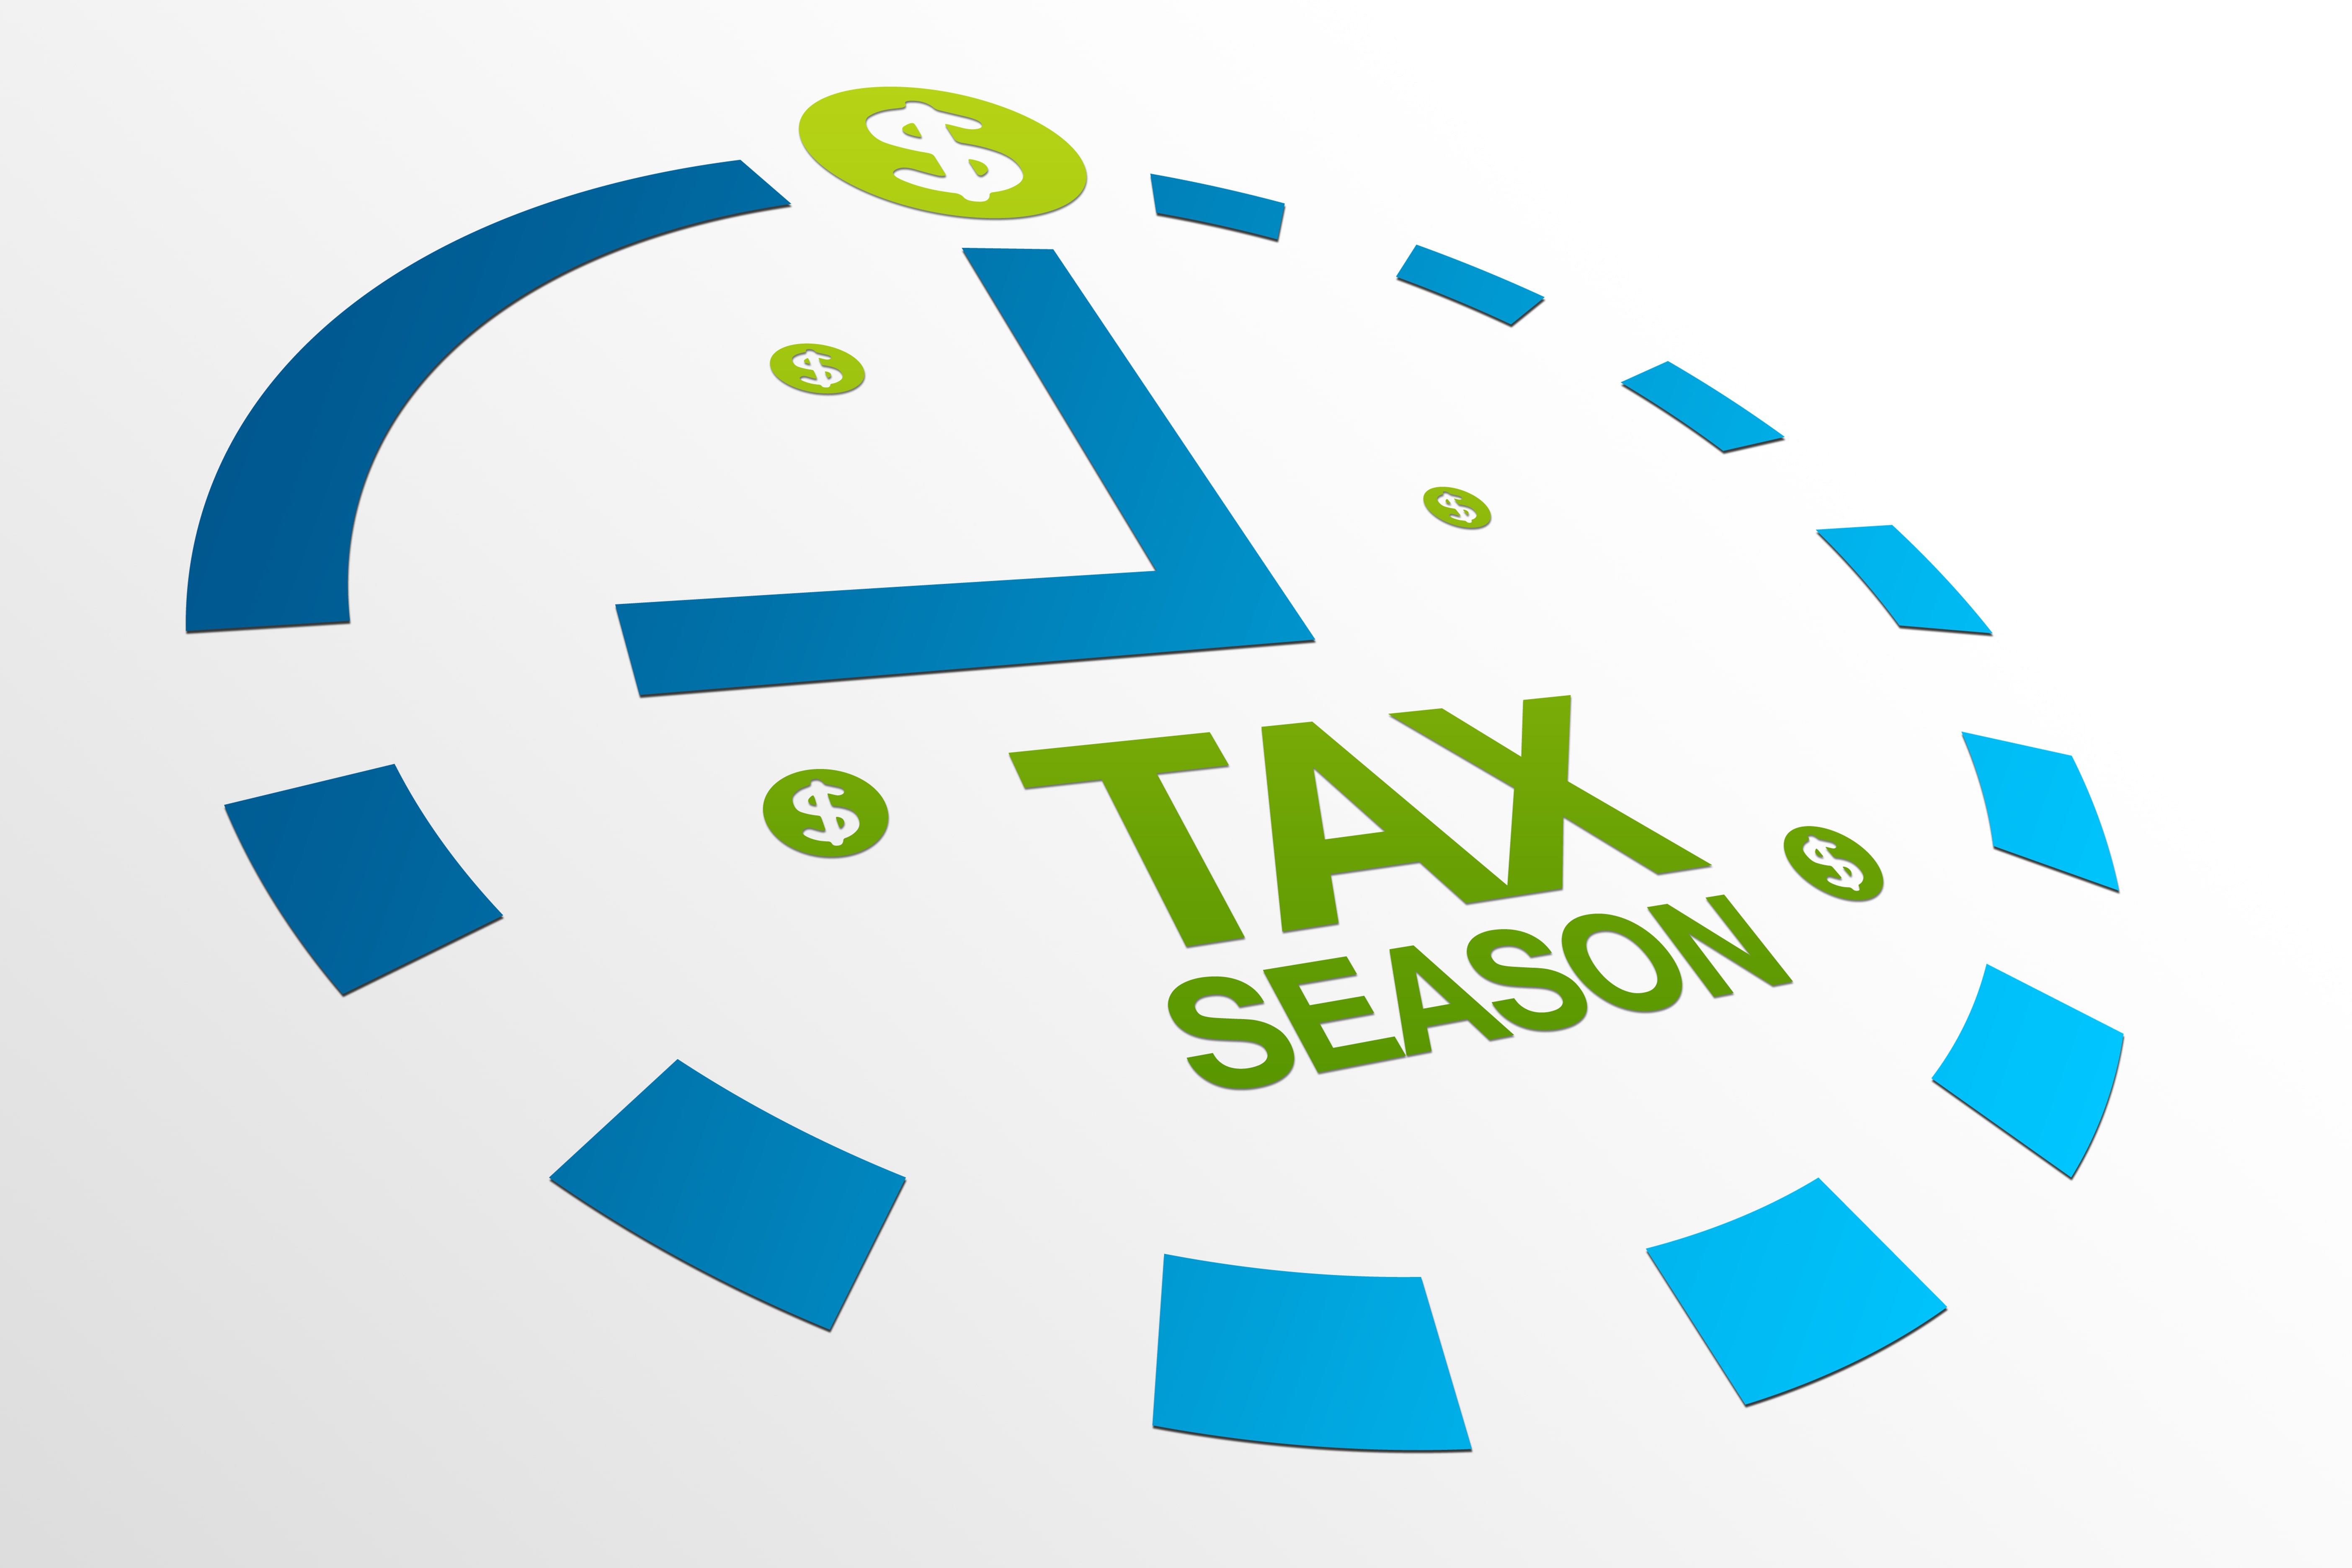 Encouraging Tips for this Tax Season ICA Agency Alliance, Inc.